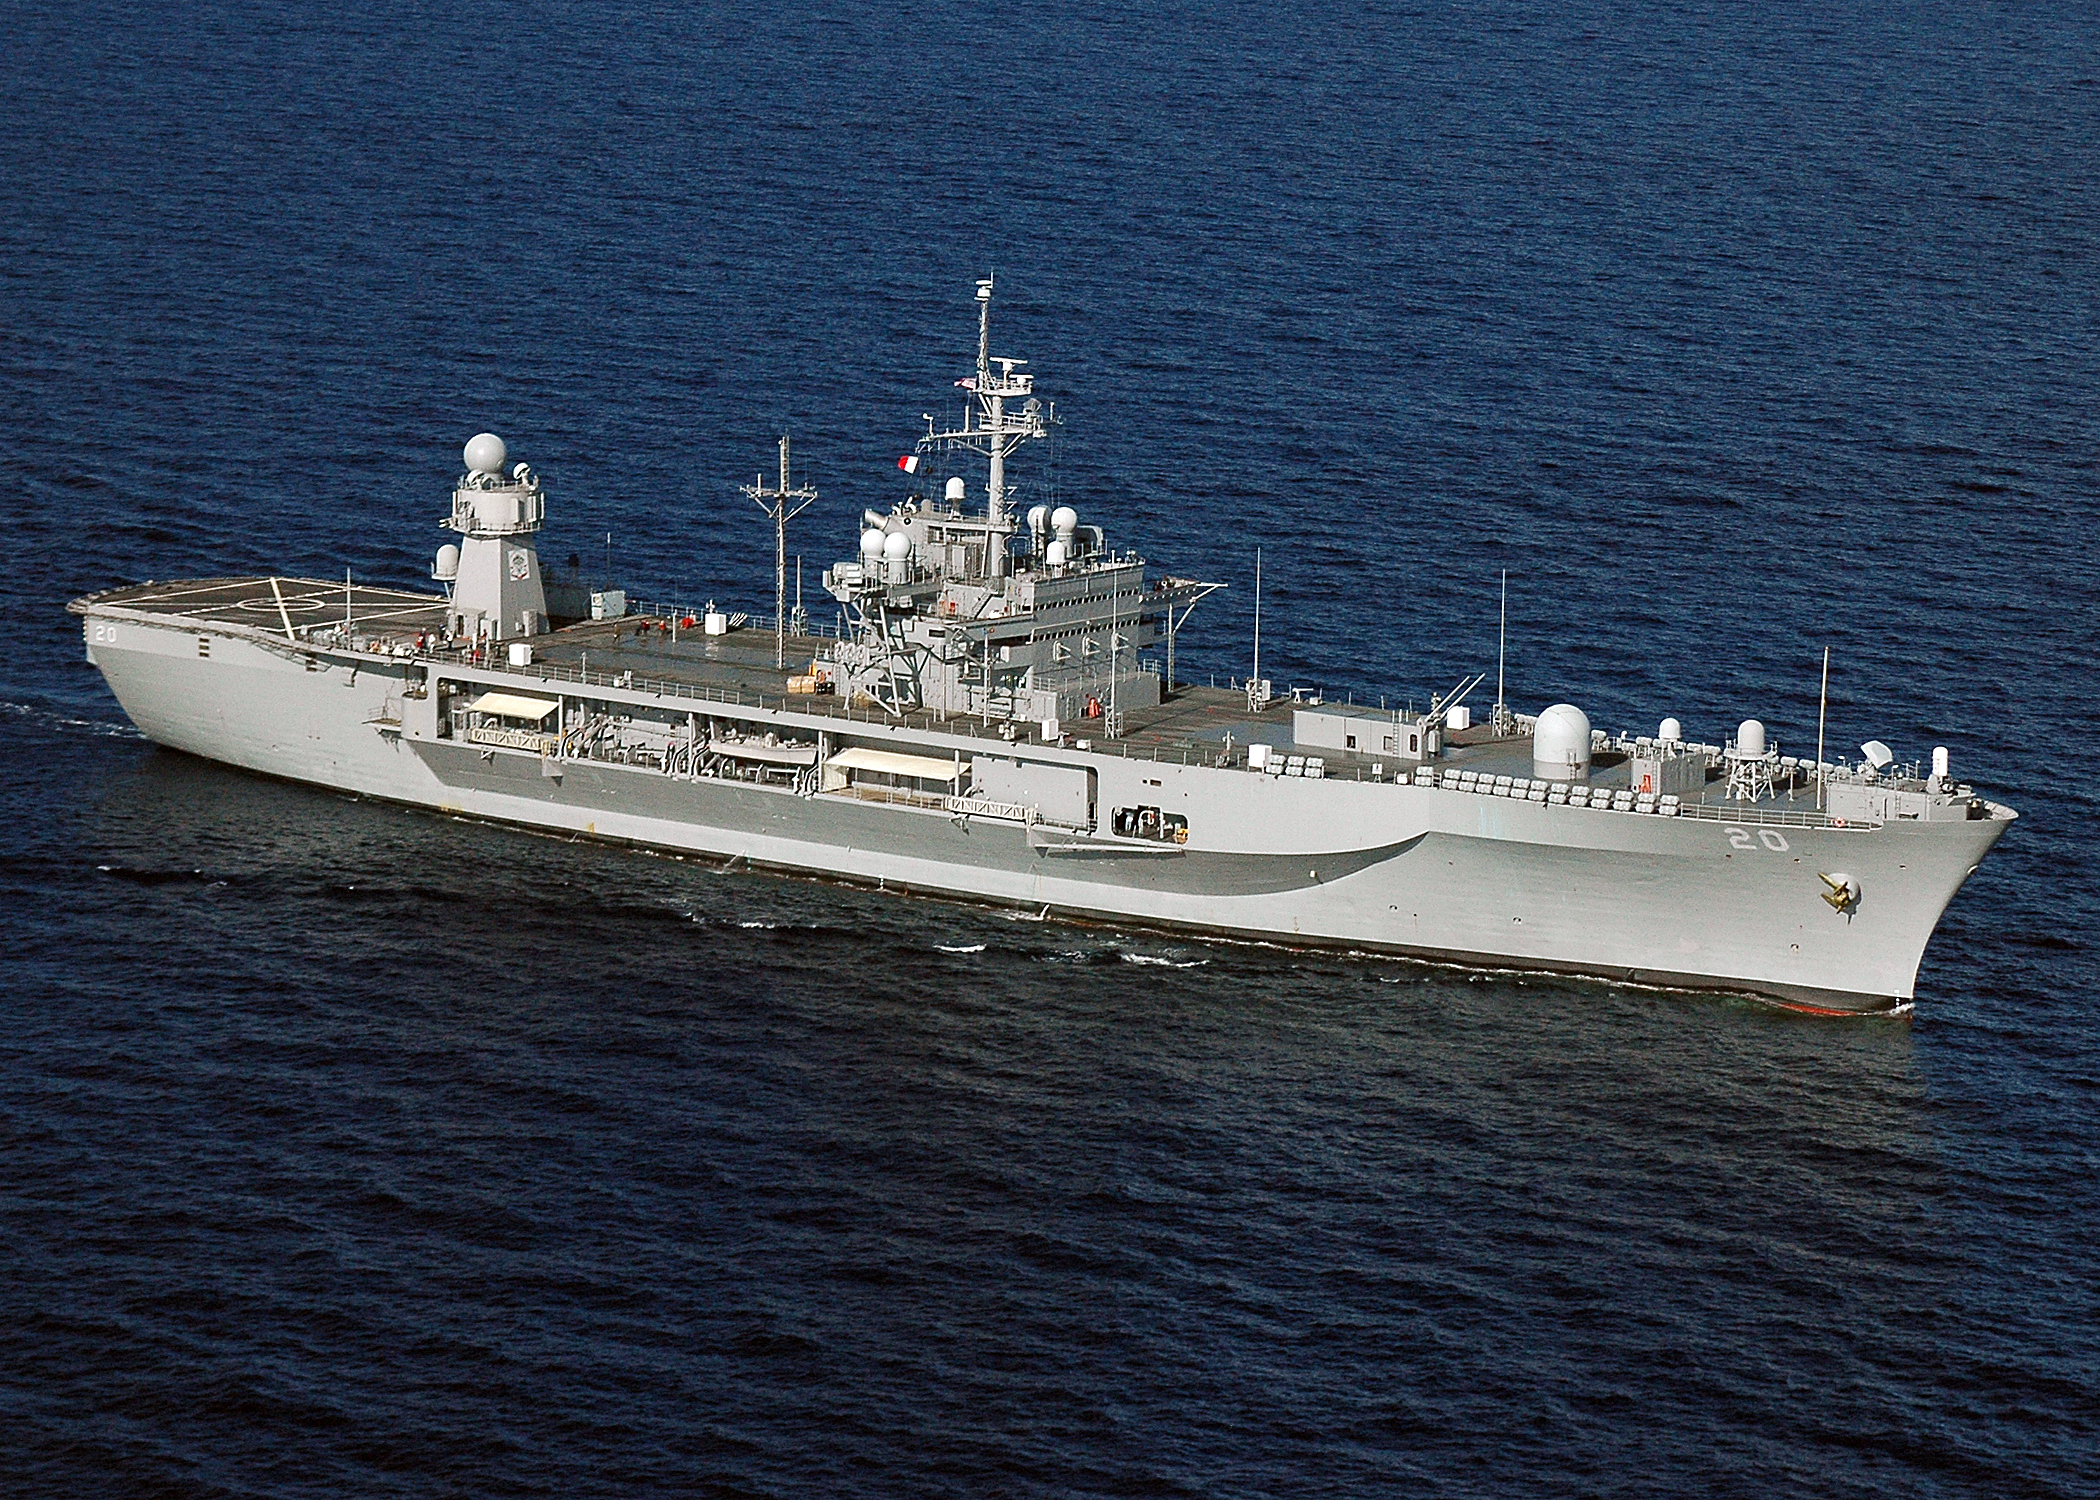 US_Navy_051006-N-0057D-128_The_Sixth_Fleet_flagship_USS_Mount_Whitney_(LCC_20)_underway_in_the_Mediterranean_Sea_during_exercise_Destined_Glory_(Loyal_Midas)_2005.jpg